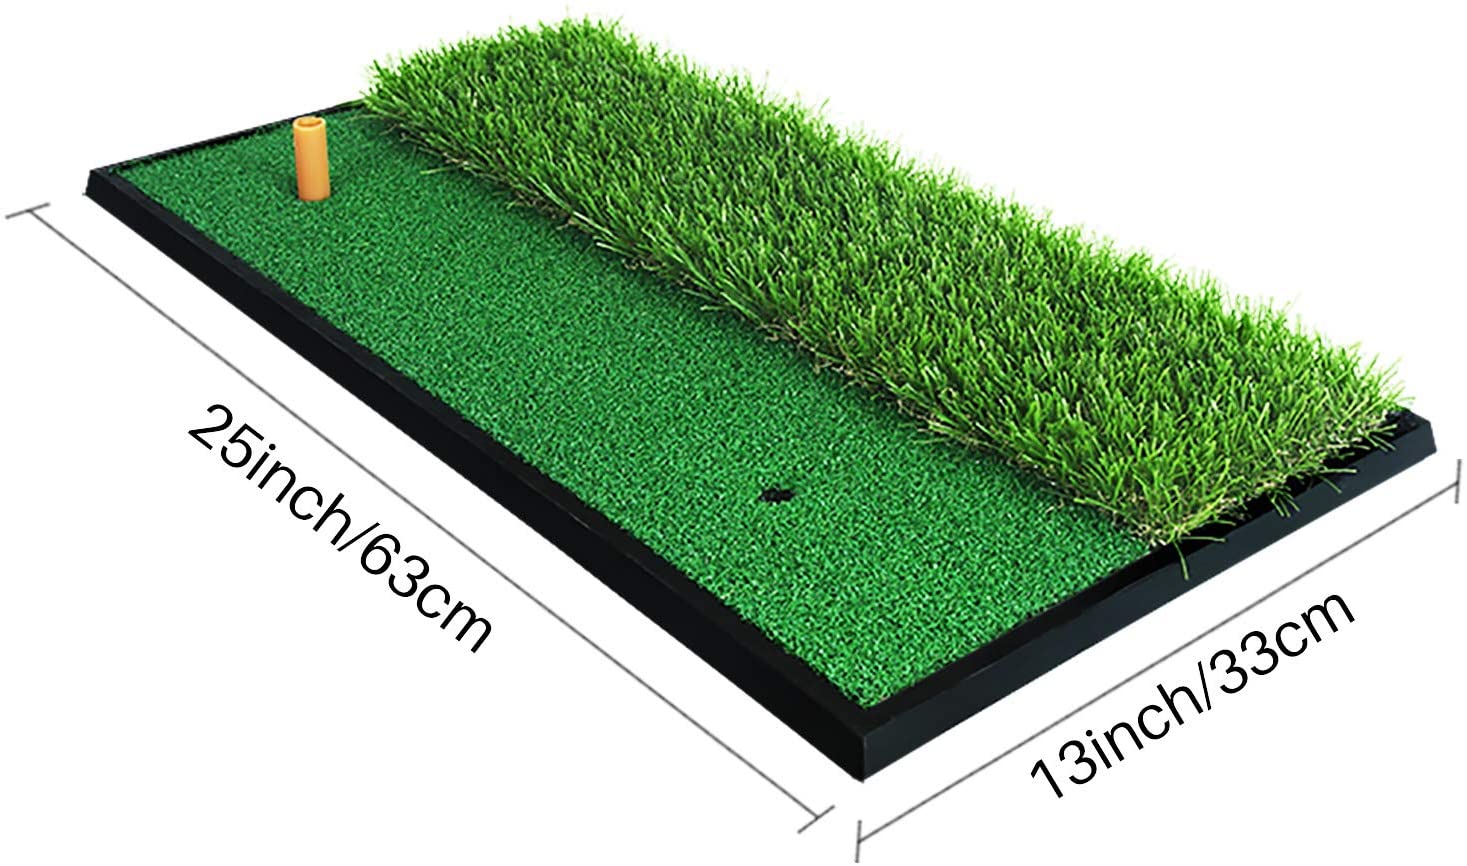 GolfBasic Golf Turf Practice DOUBLE GRASS Mat for Driving Hitting Chipping